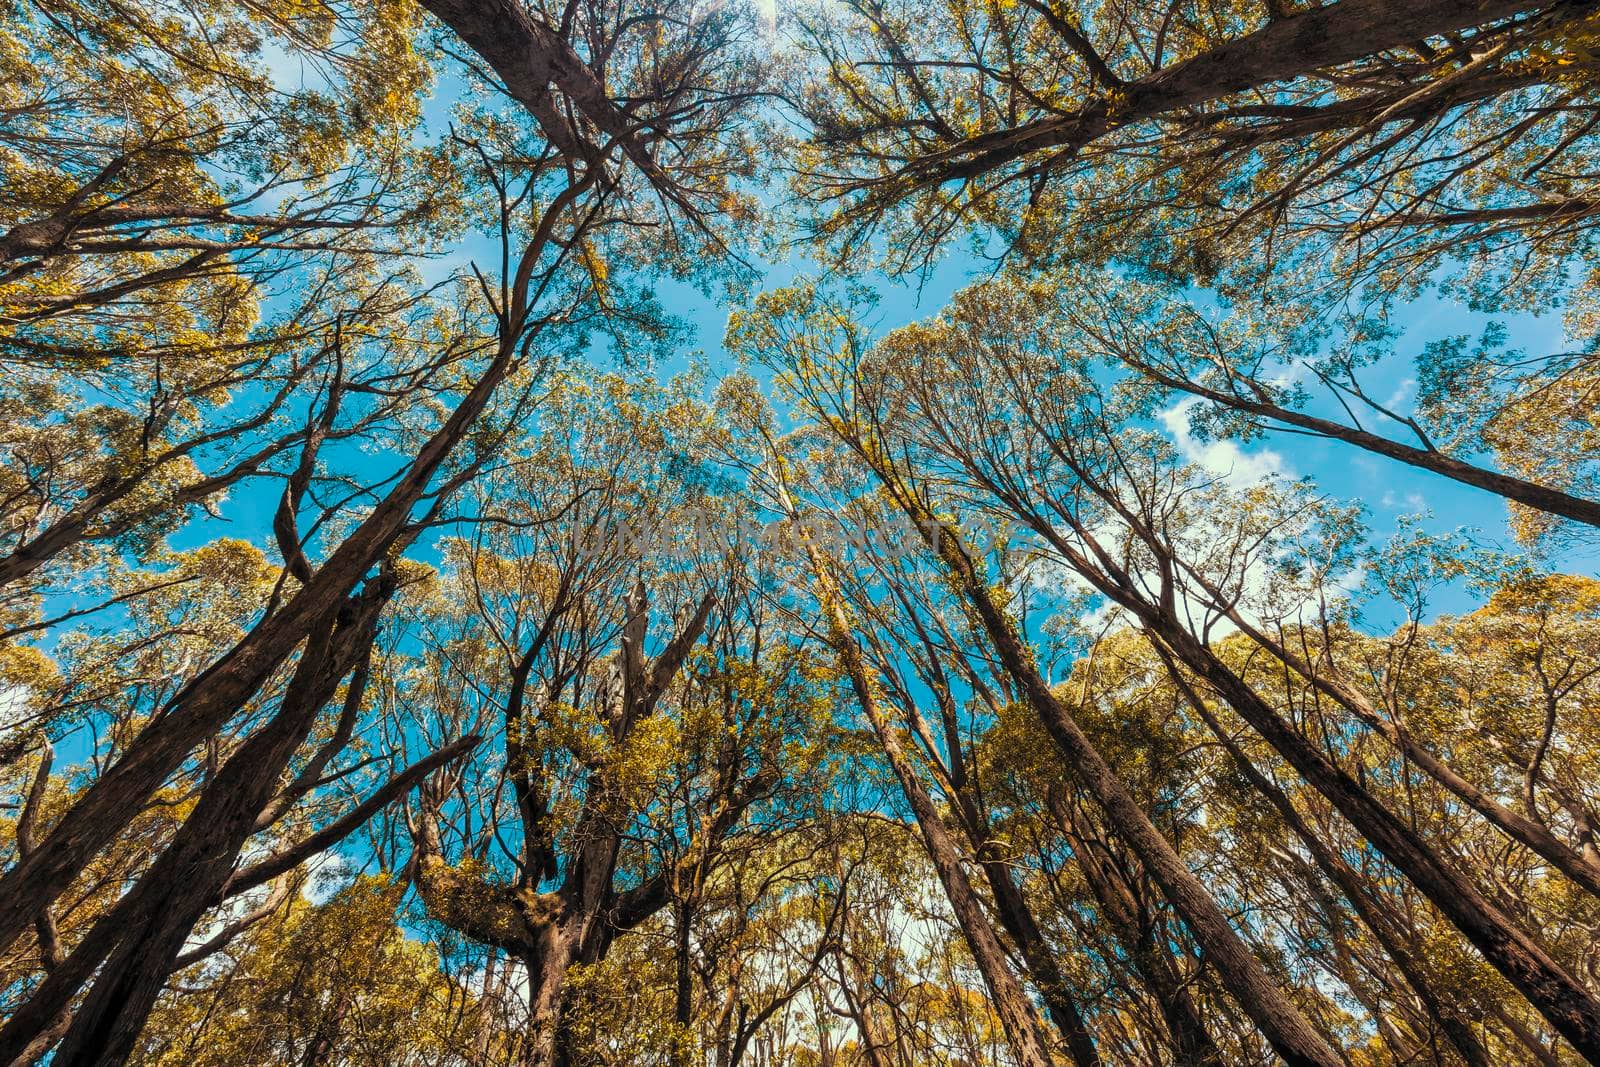 Looking up through a tree canopy into blue sky in a forest of gum trees in regional Australia